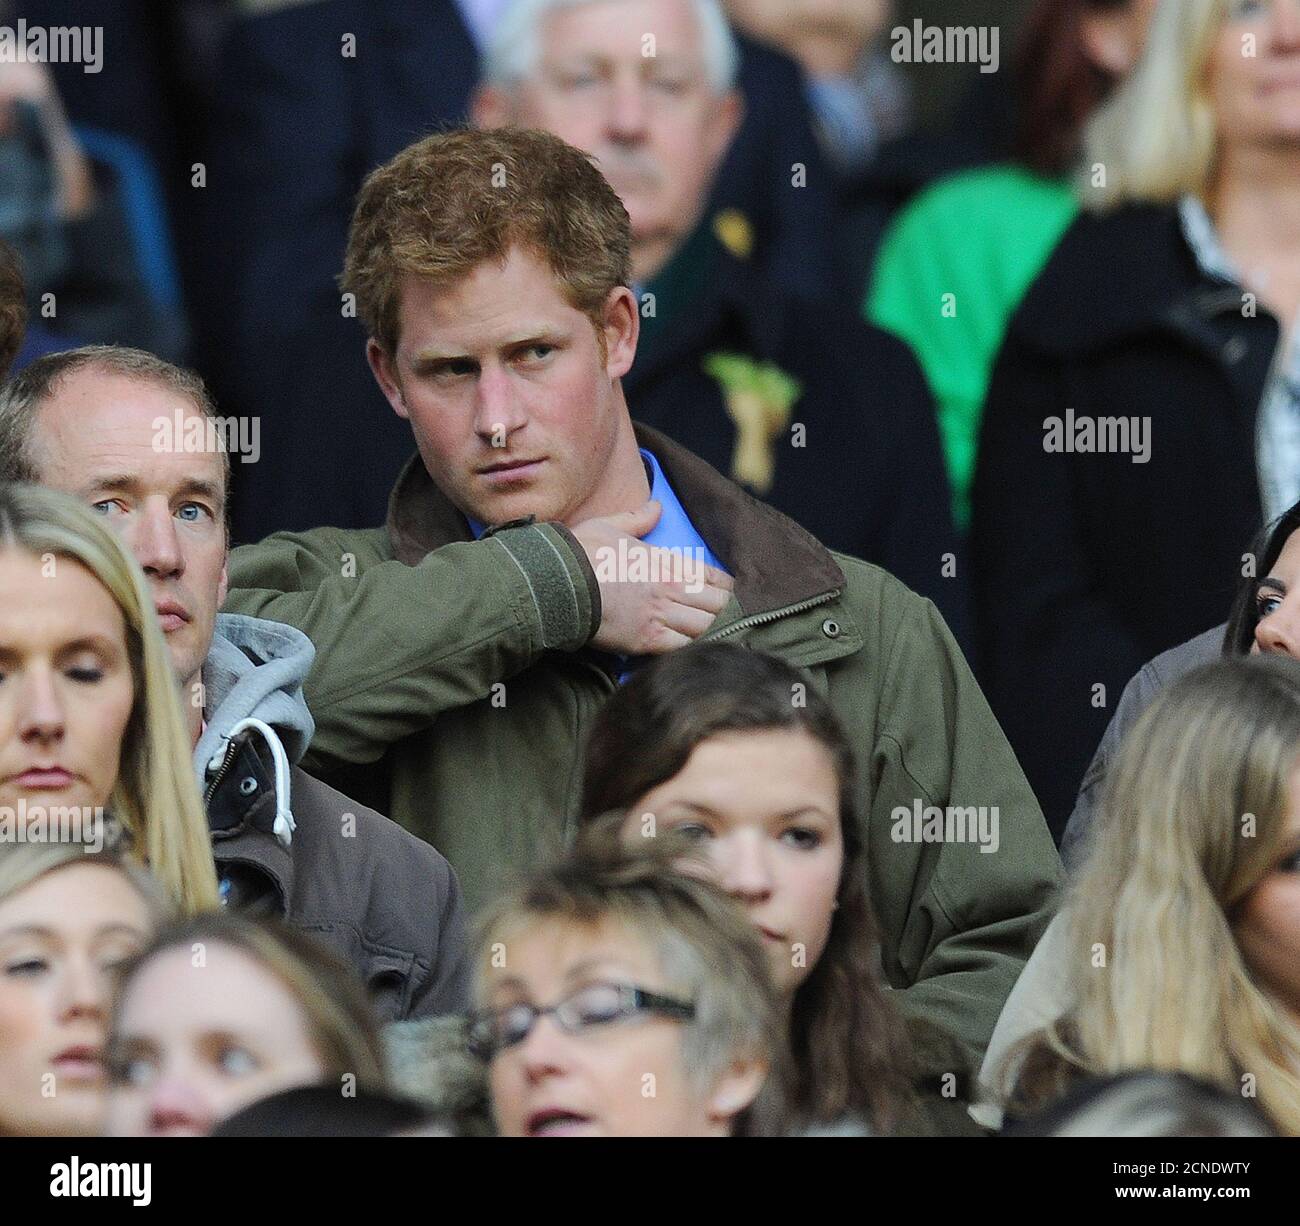 Prince Harry England Vs. Ireland RBS Six Nations Rugby at Twickenham, London, Britain - 17 Mar 2012  PICTURE CREDIT : © MARK PAIN / ALAMY STOCK PHOTO Stock Photo